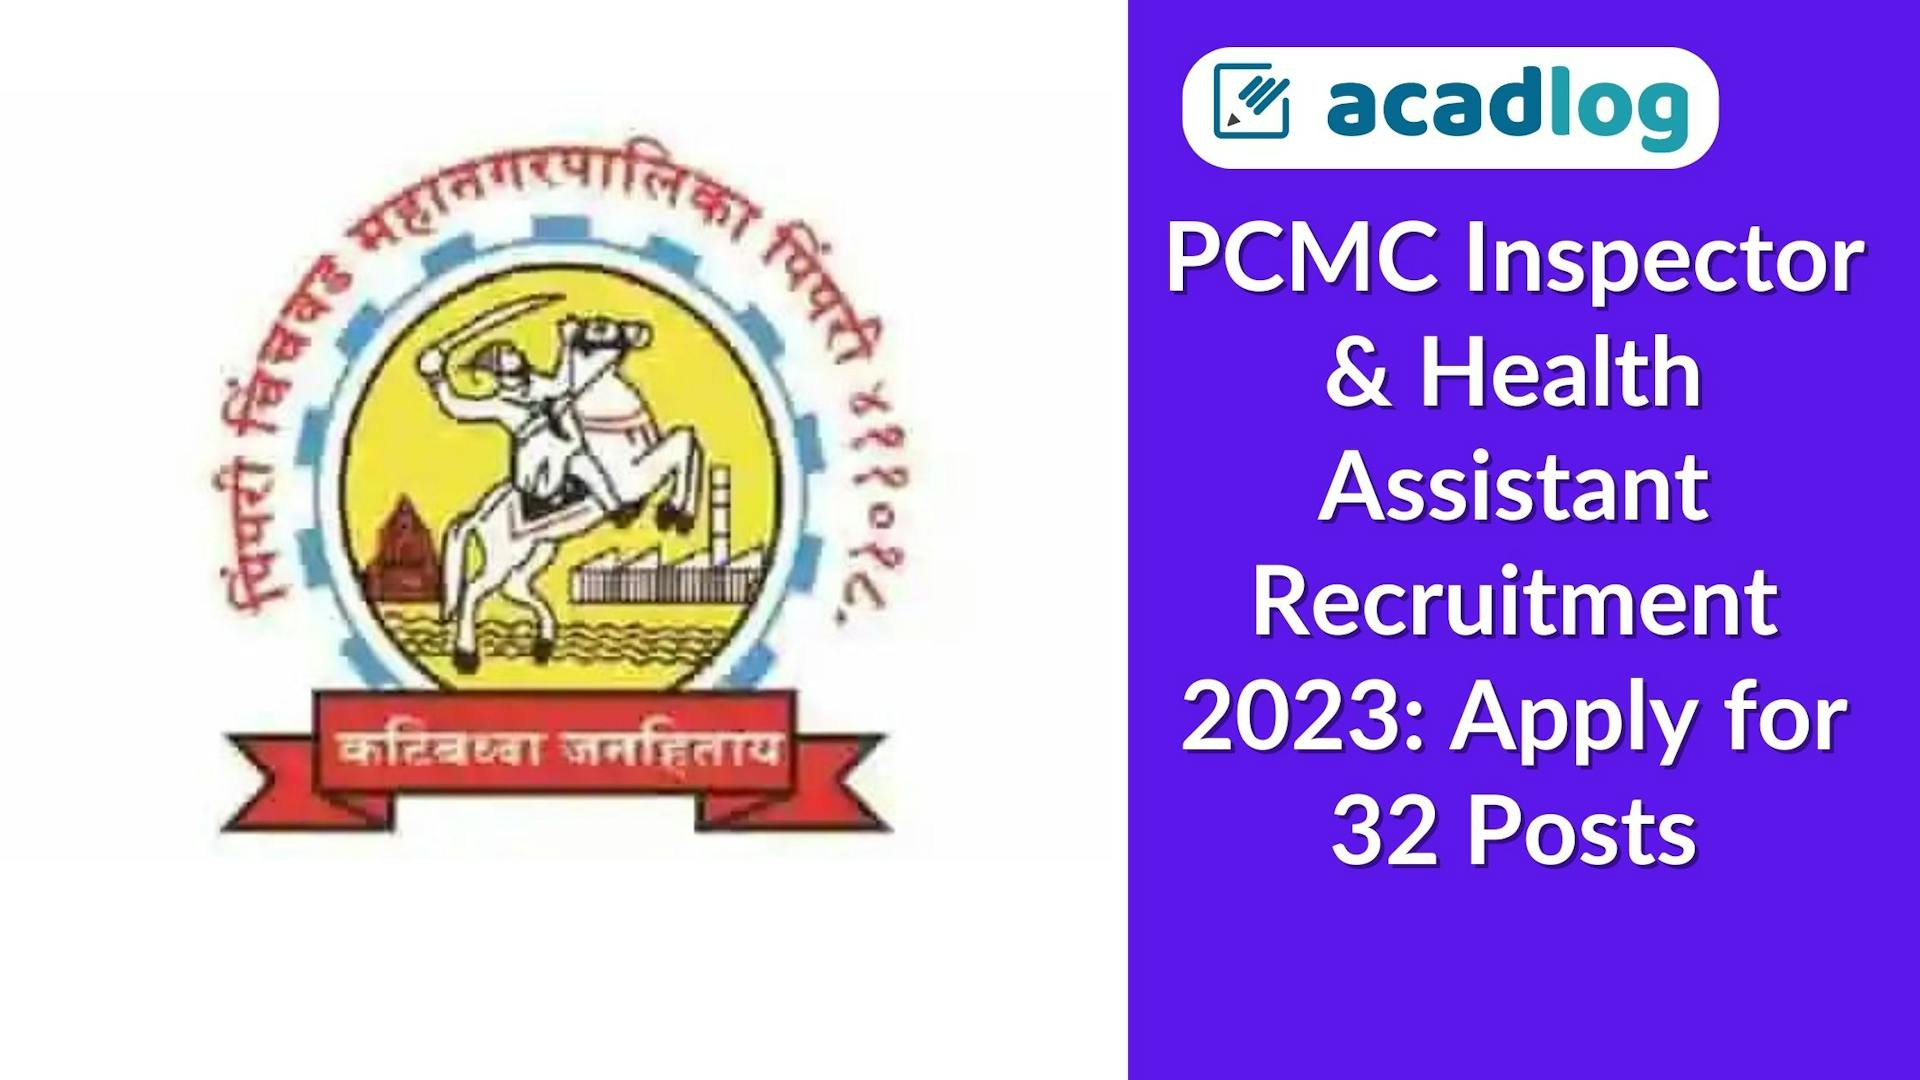 PCMC Inspector & Health Assistant Recruitment 2023: Apply for 32 Posts